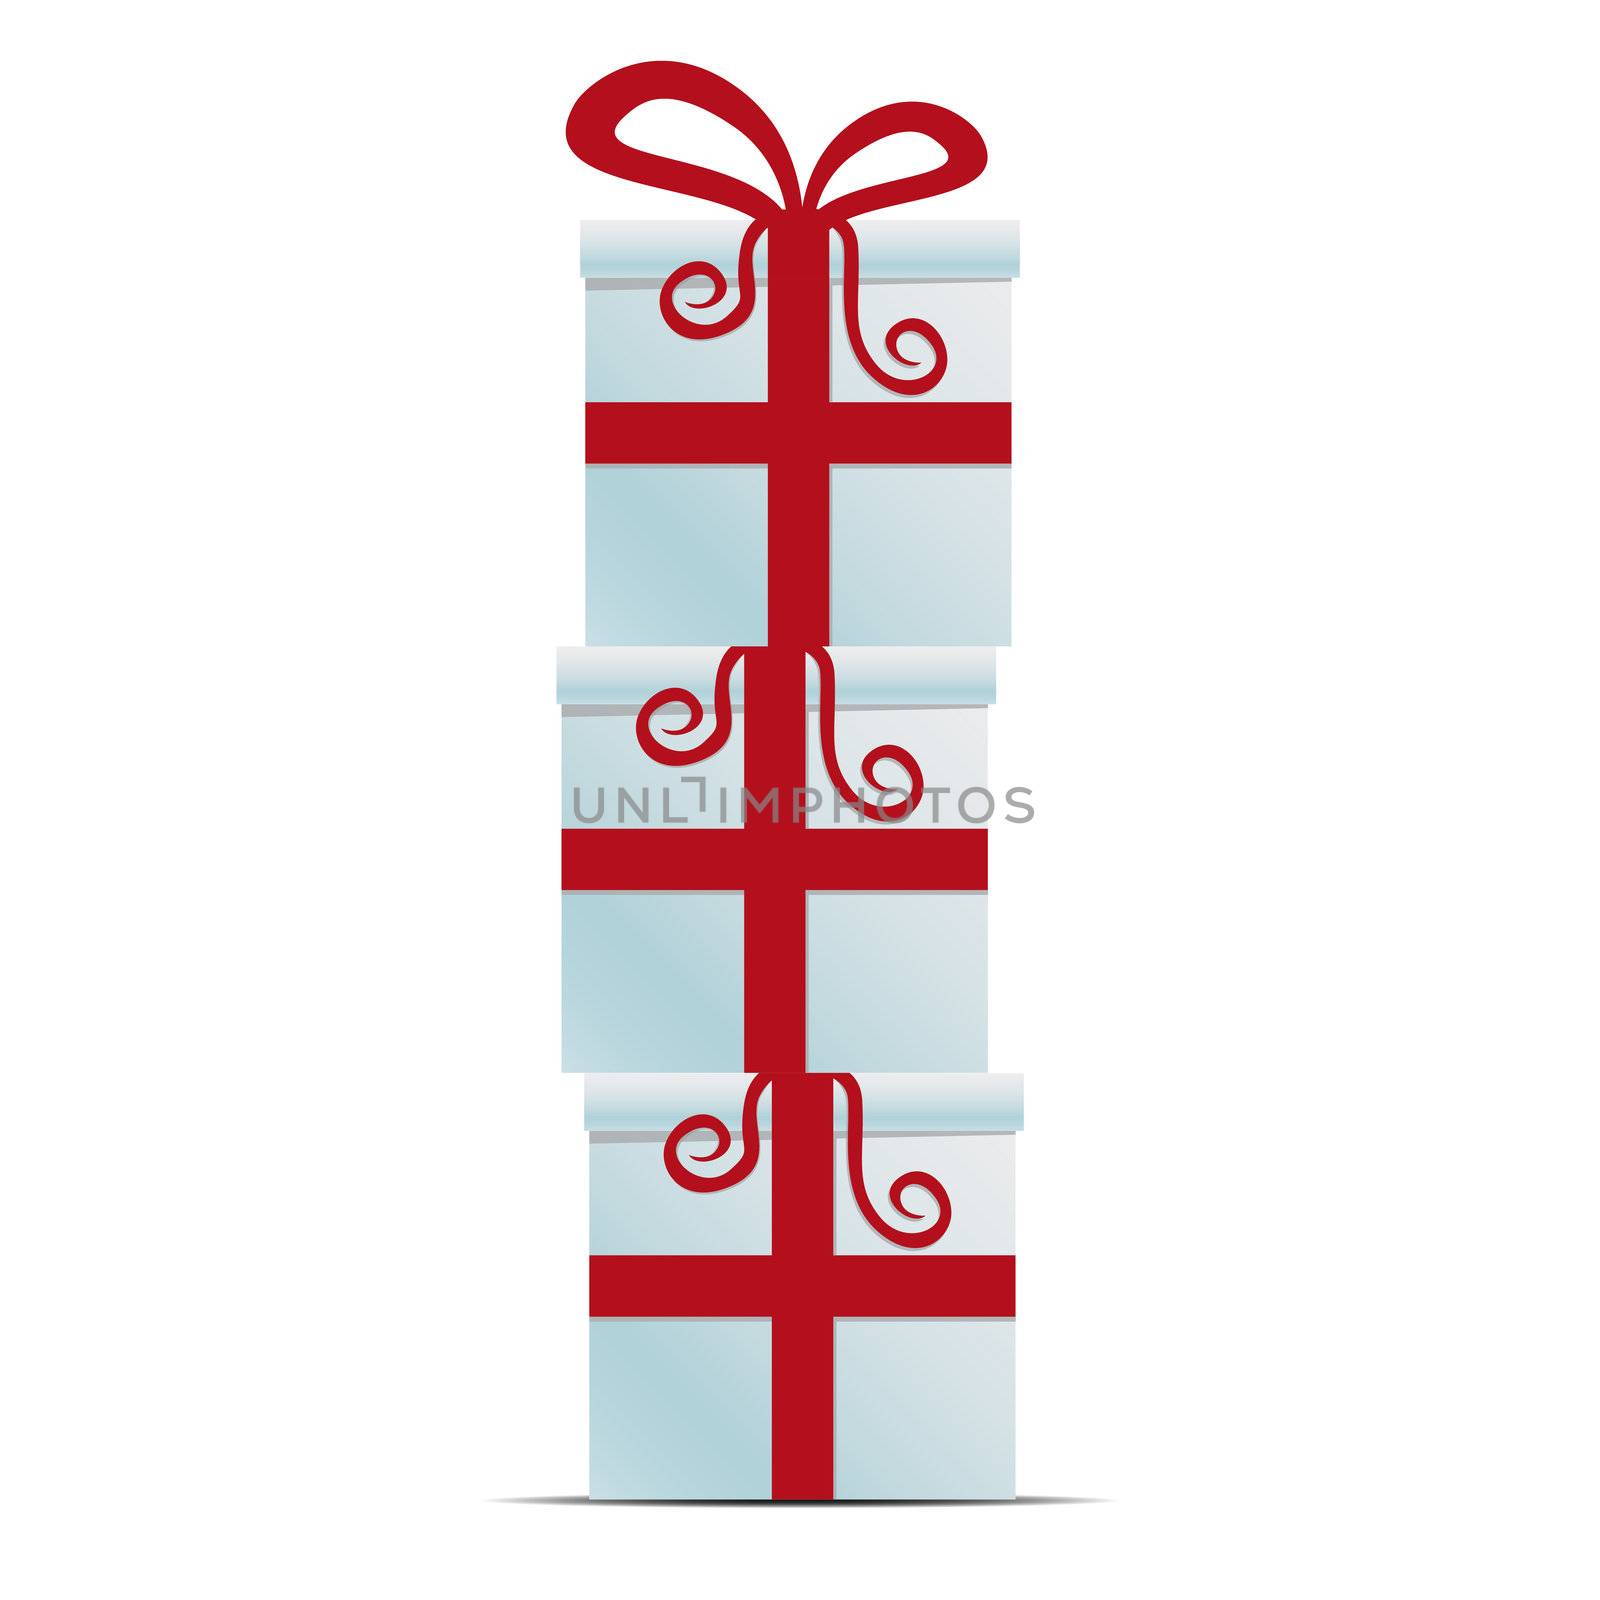 merry christmas red white gift box stack